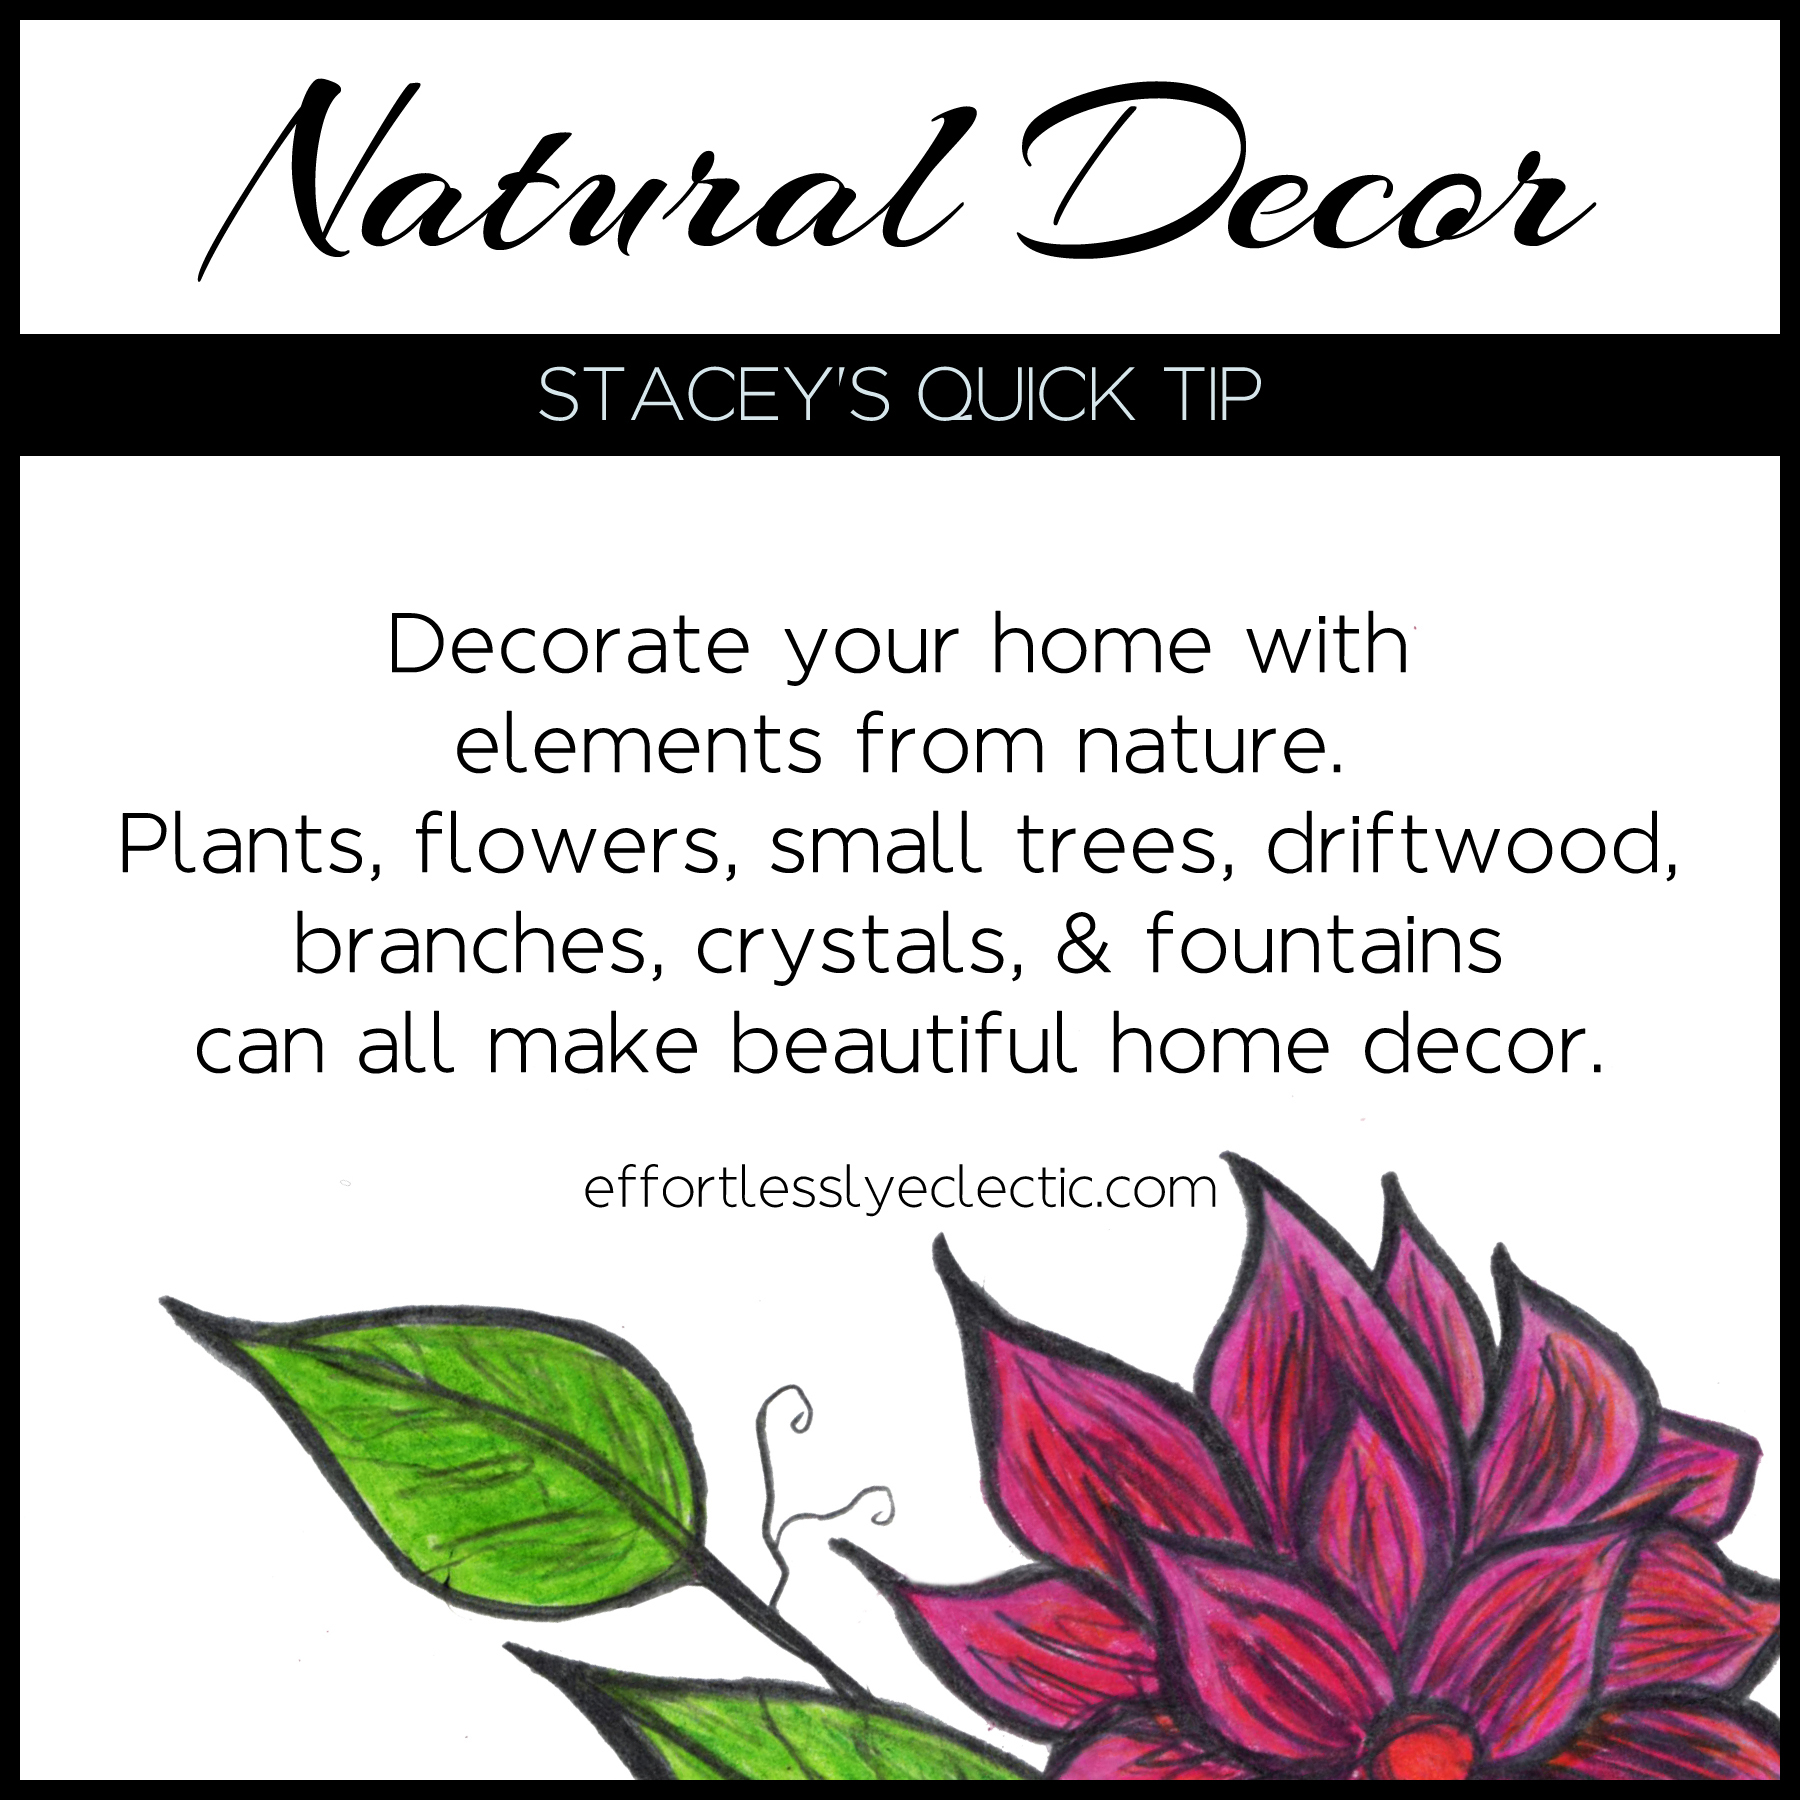 Natural Decor - A home styling tip about how to bring nature indoors